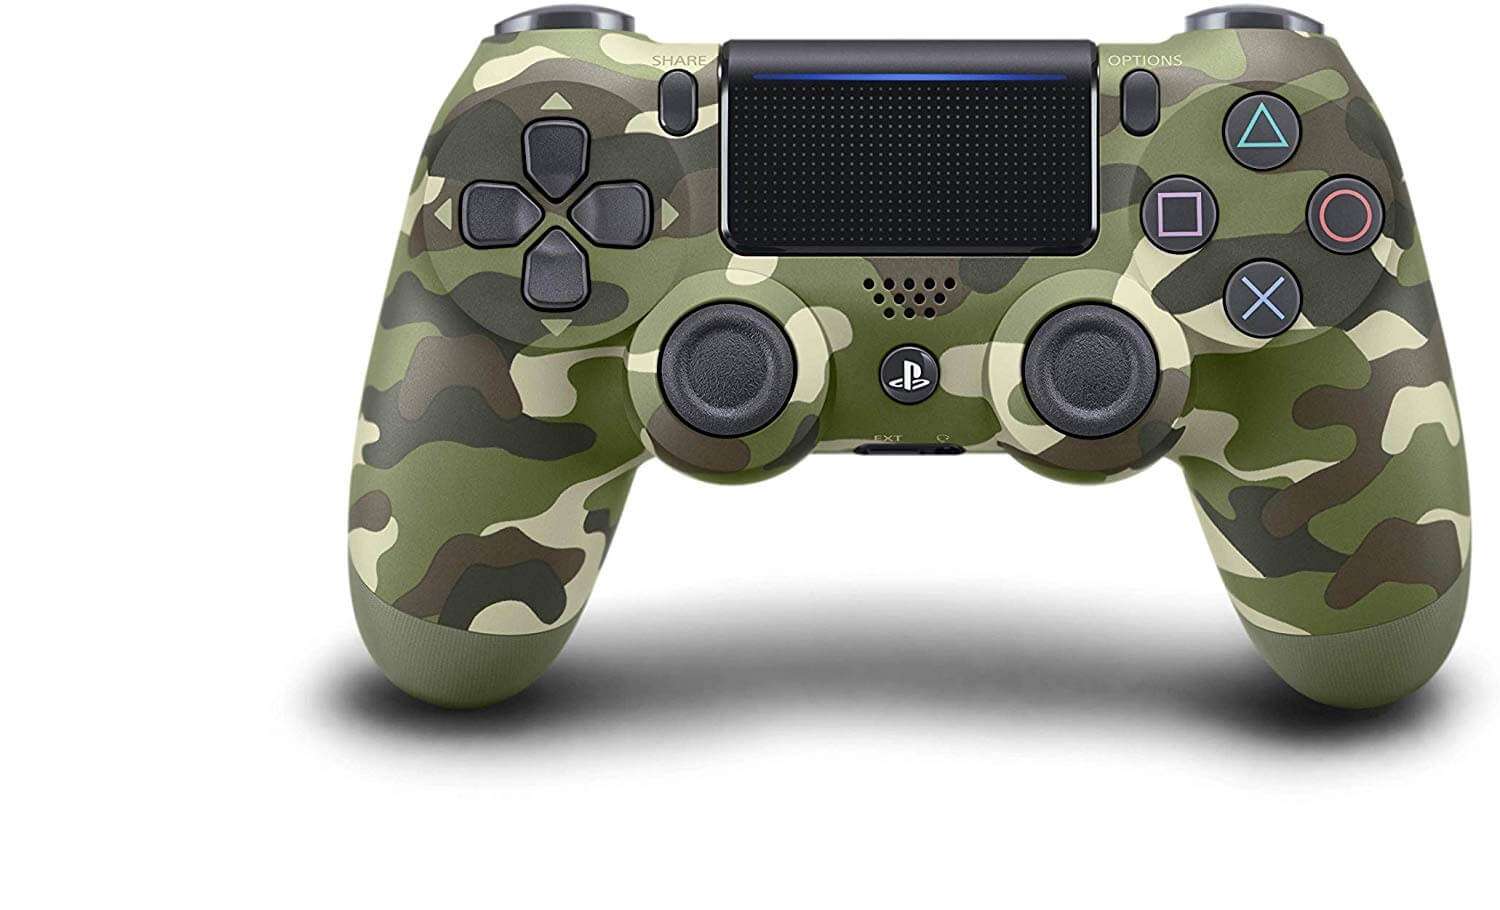 Sony DualShock 4 Wireless Controller For PlayStation 4 - Army Green